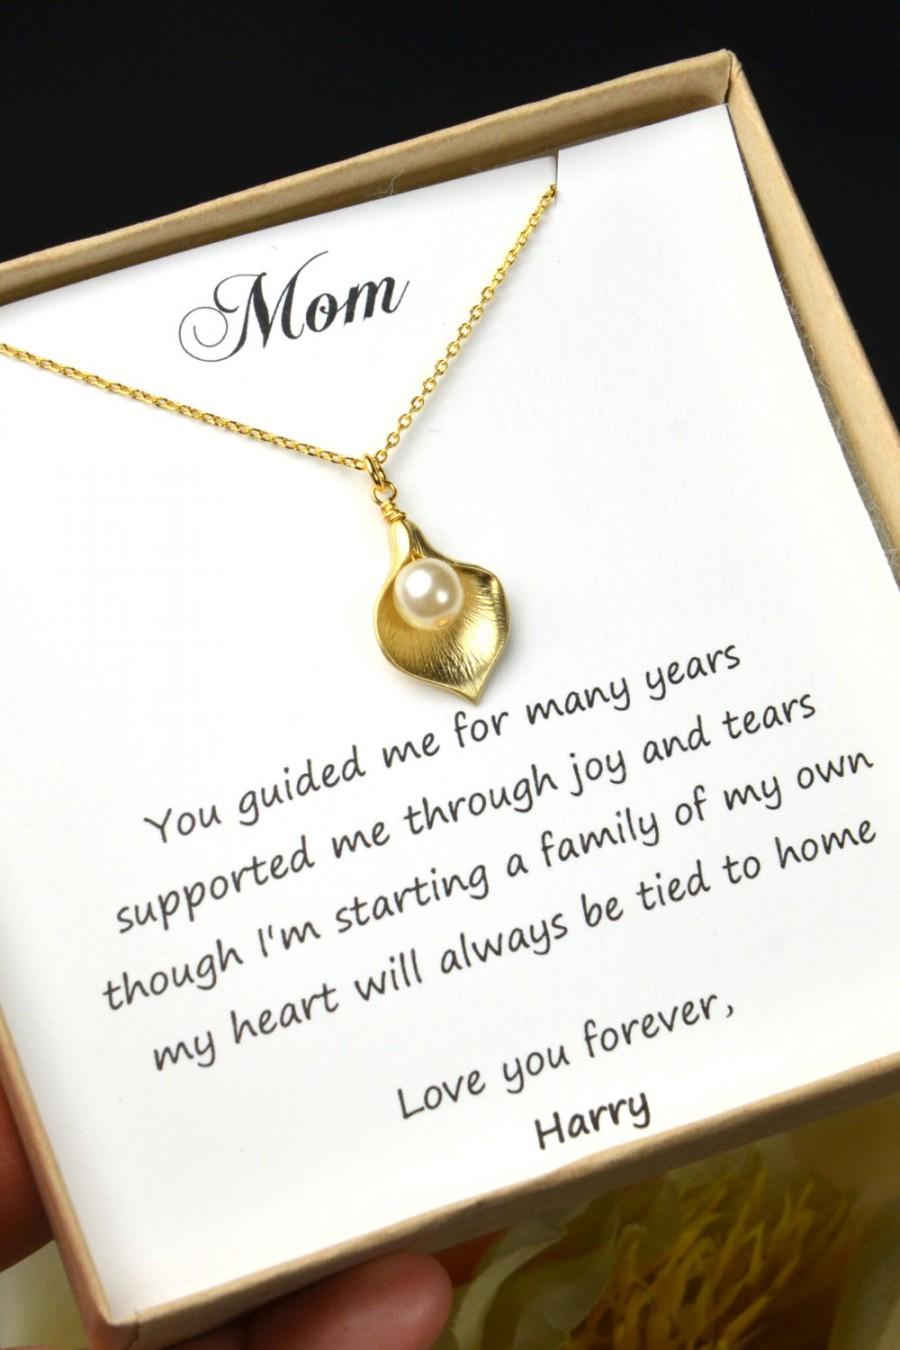 Hochzeit - Pearl Necklace, Mother of the Groom Gift, Mother of the Bride Gift, Wedding Necklace, Gift for Mom